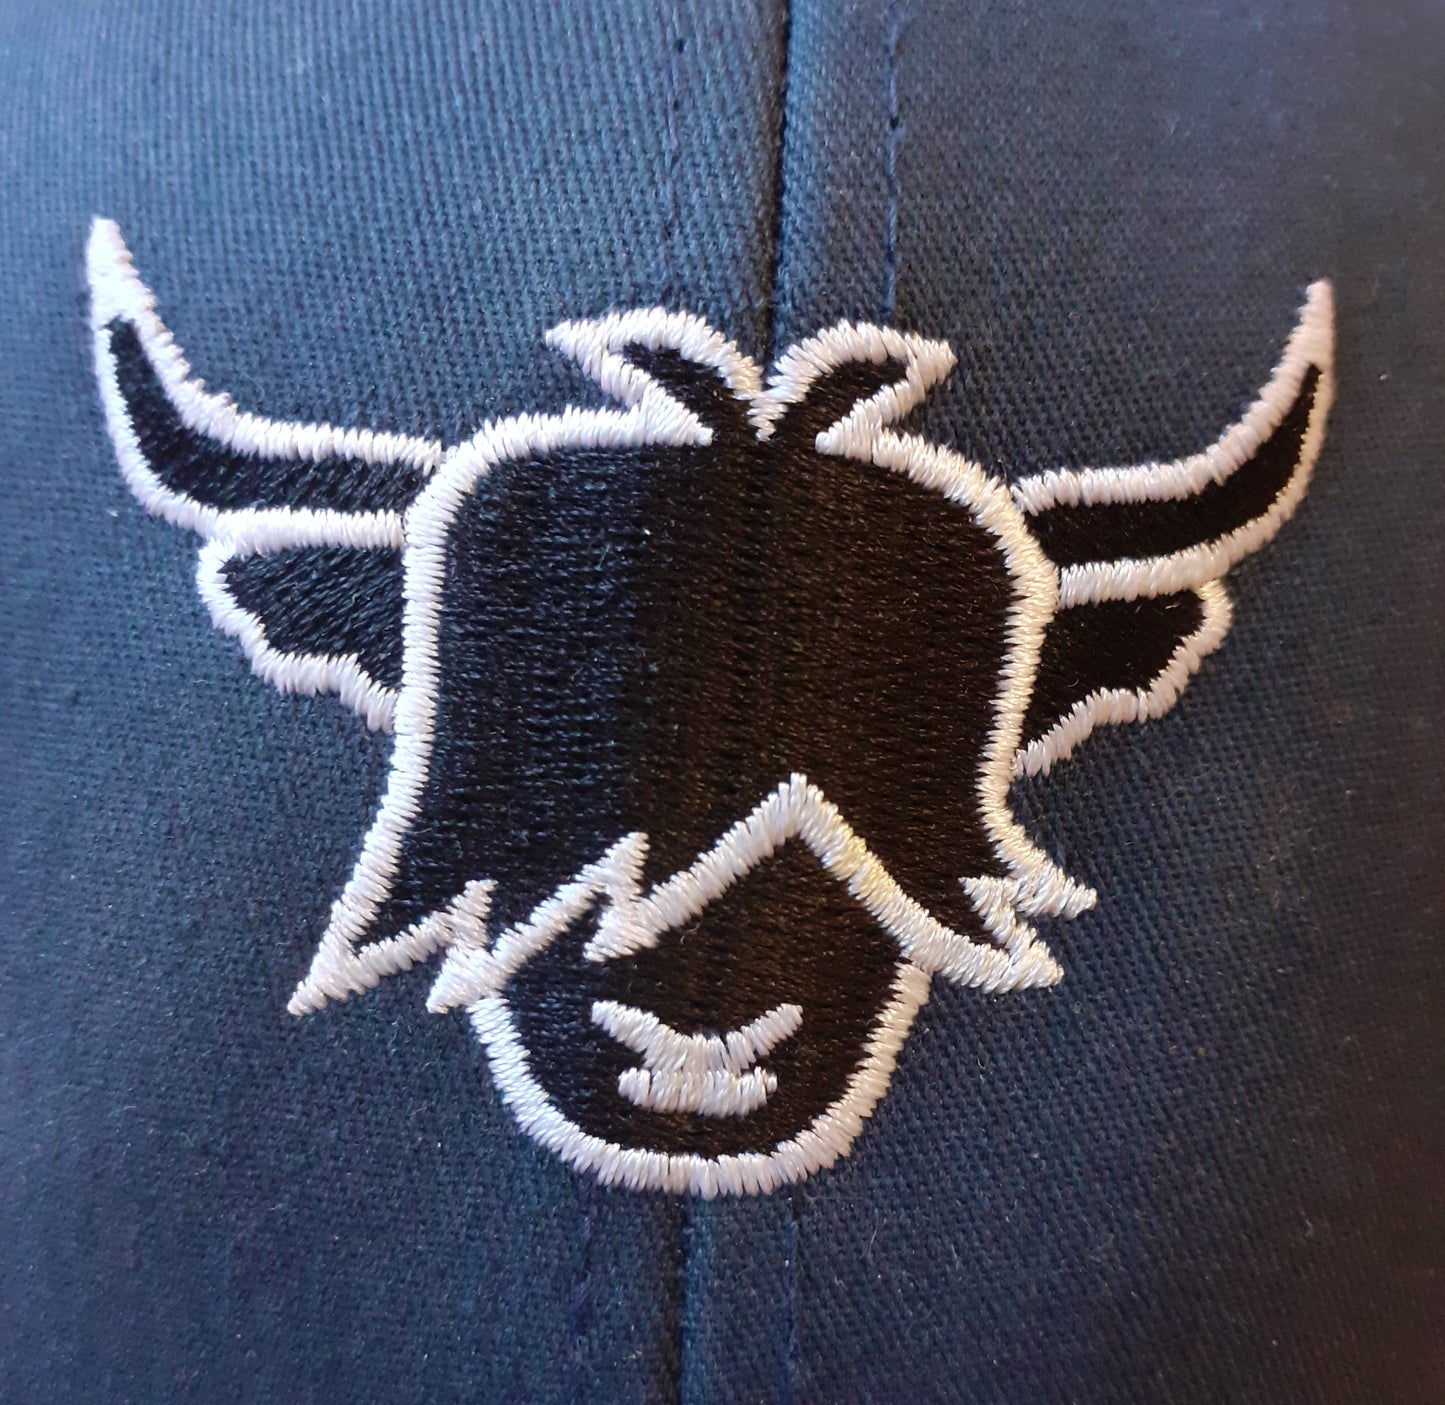 Highland cow embroidery on a cap